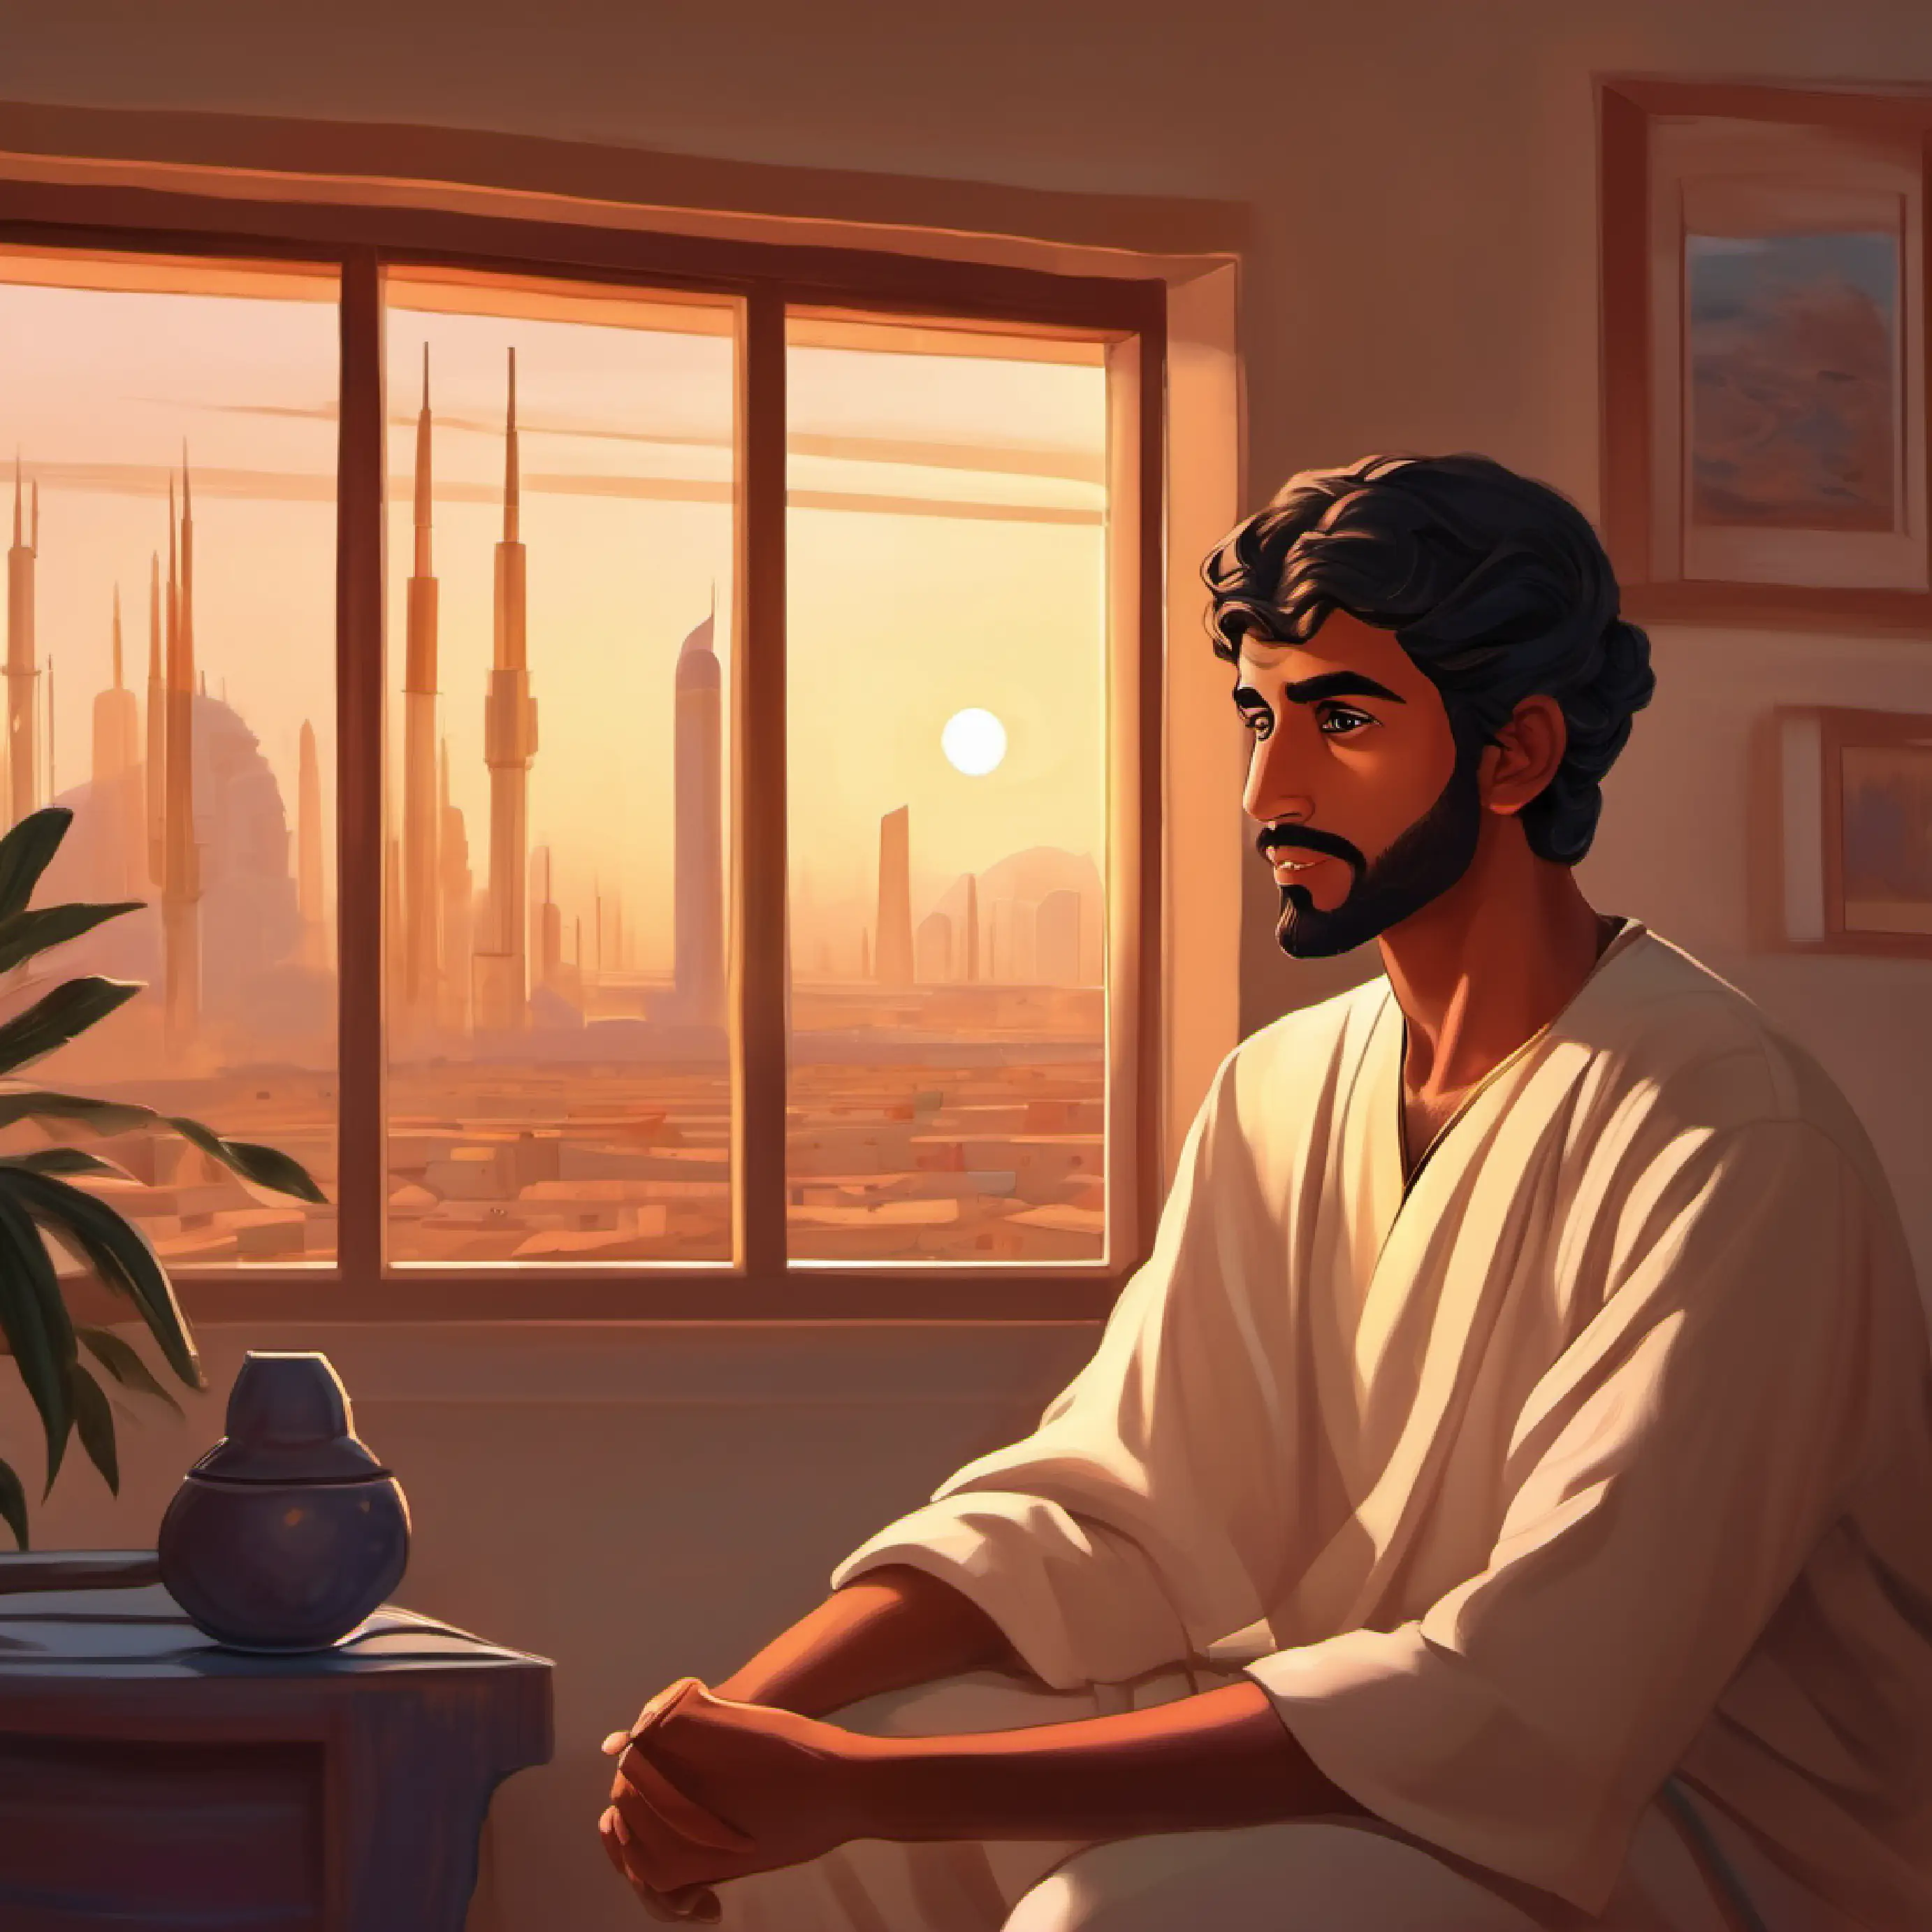 Young Emirati man, bronze skin, earnest dark eyes, with a scientific gaze contemplating solutions for clean energy in his room.